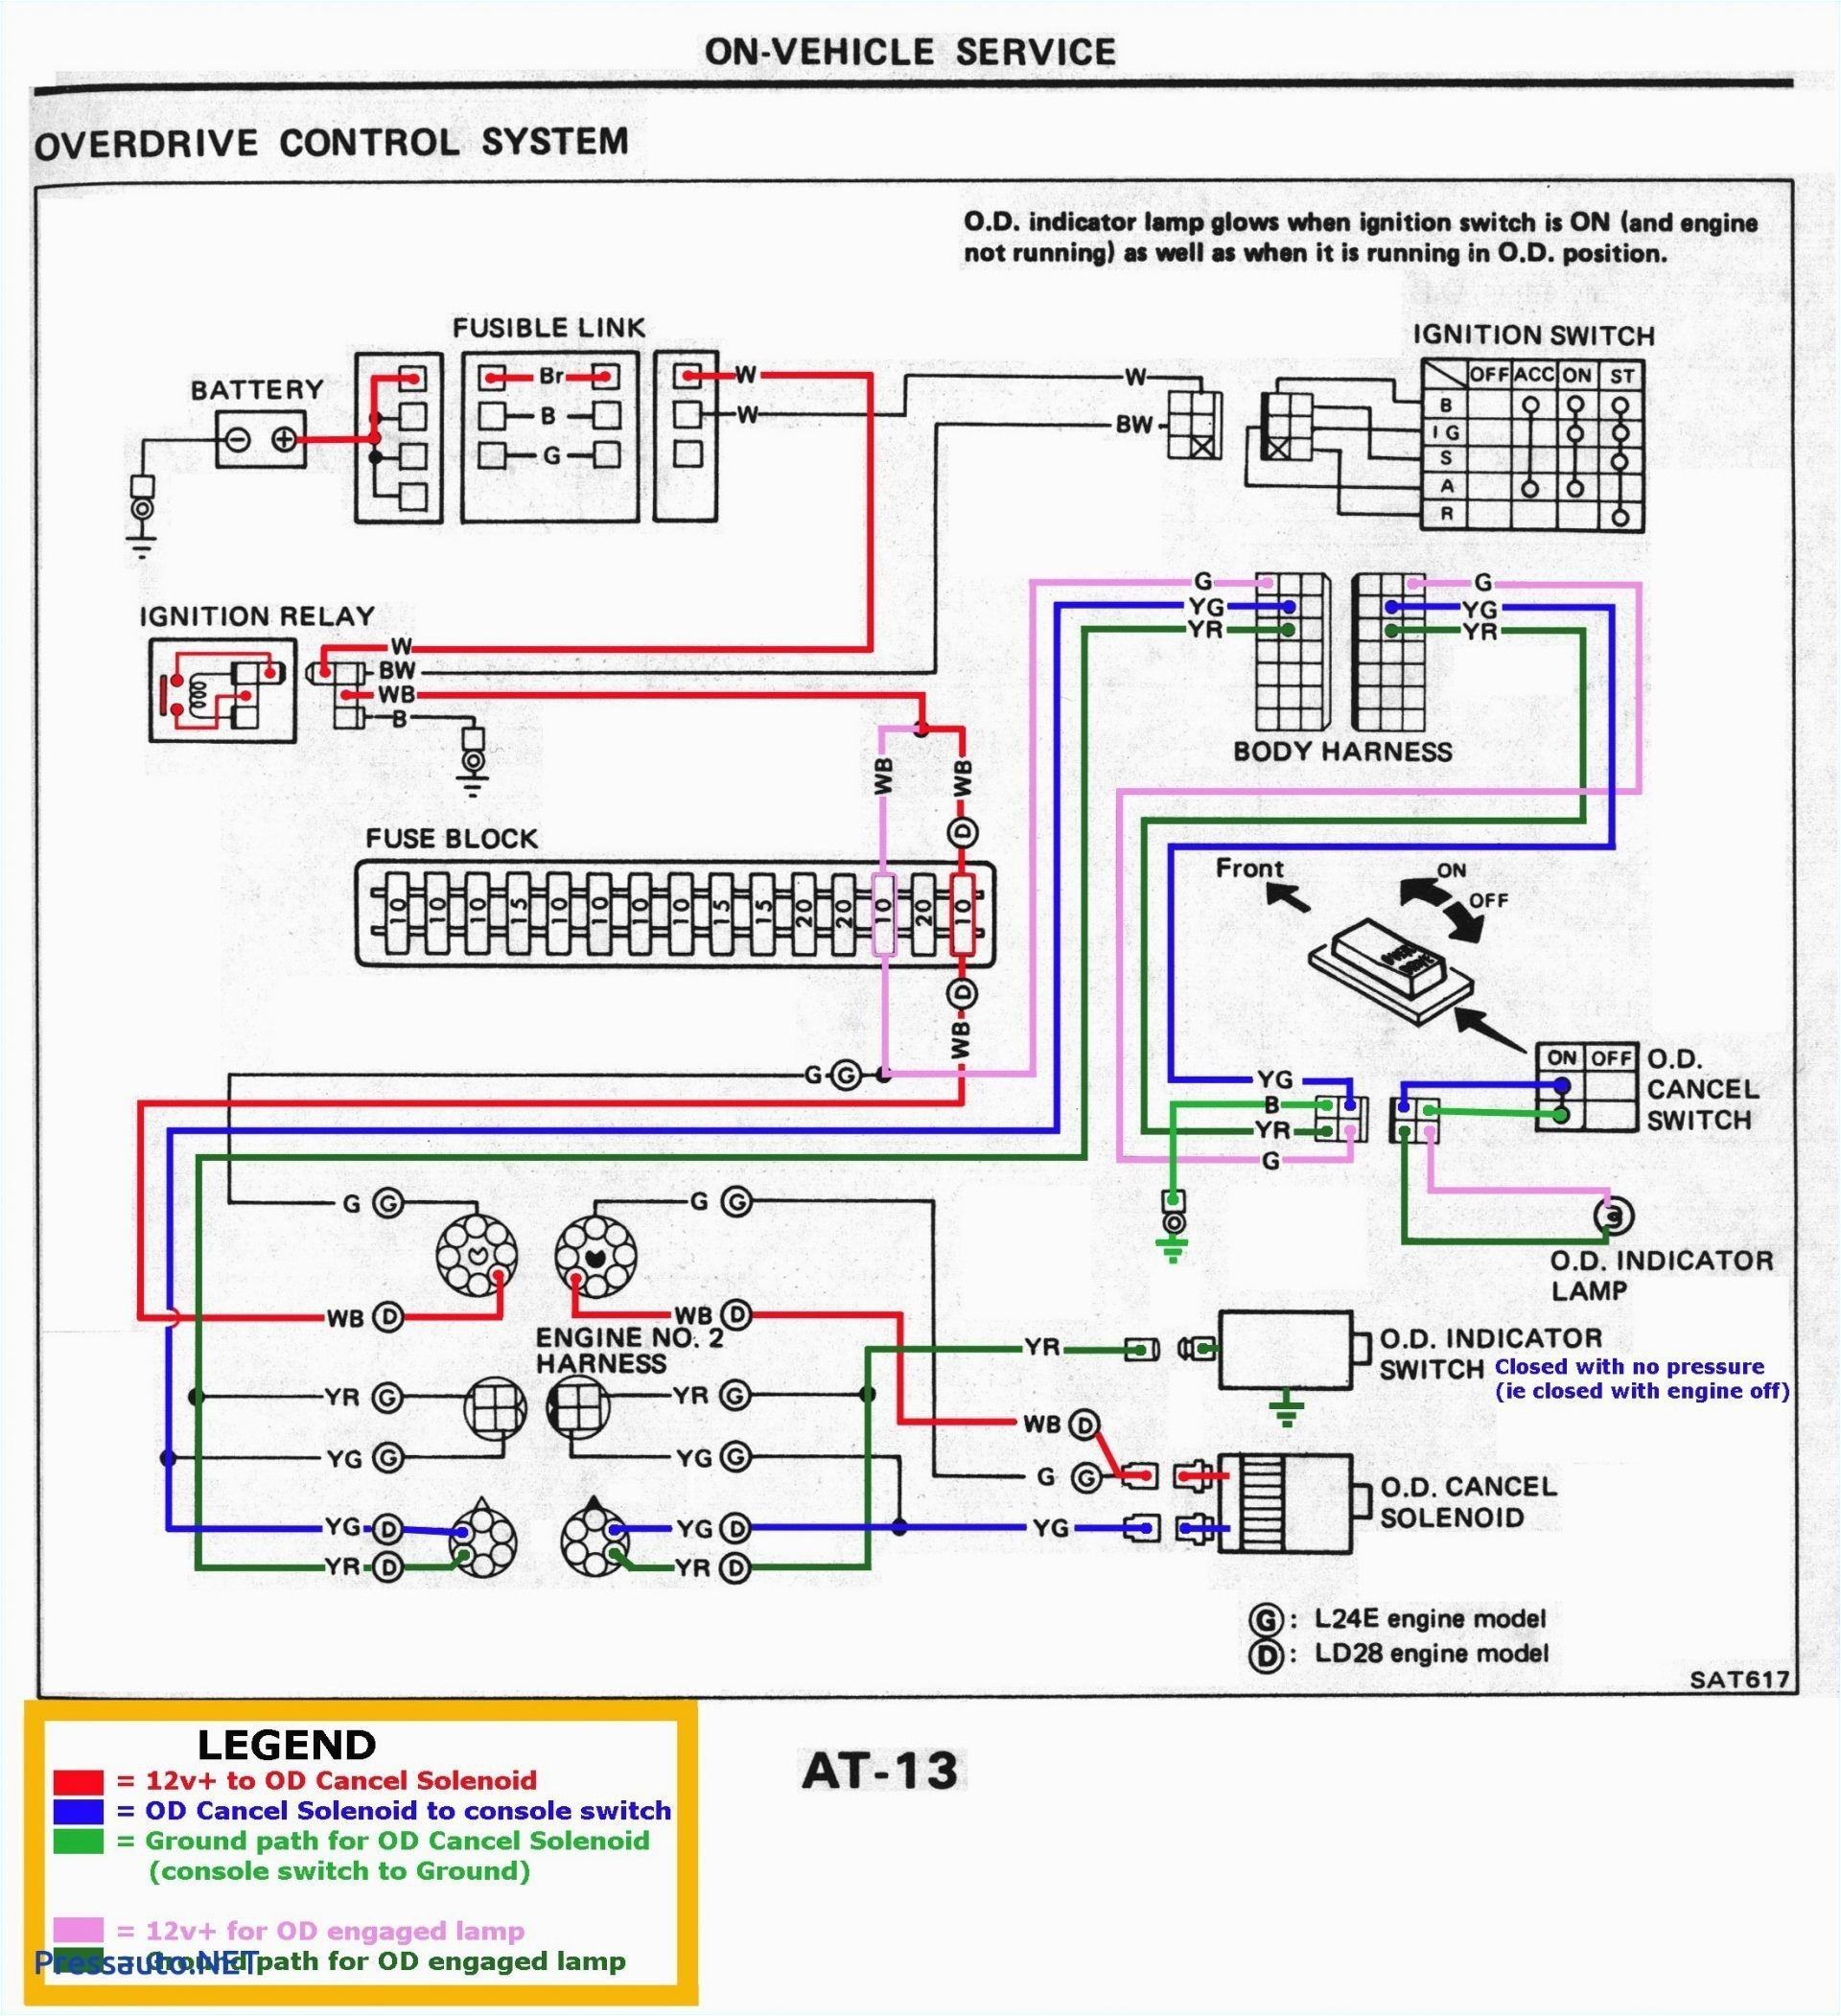 1997 lull 1054 wiring diagram experience of wiring diagram lull 644b 42 wiring diagram wiring diagram